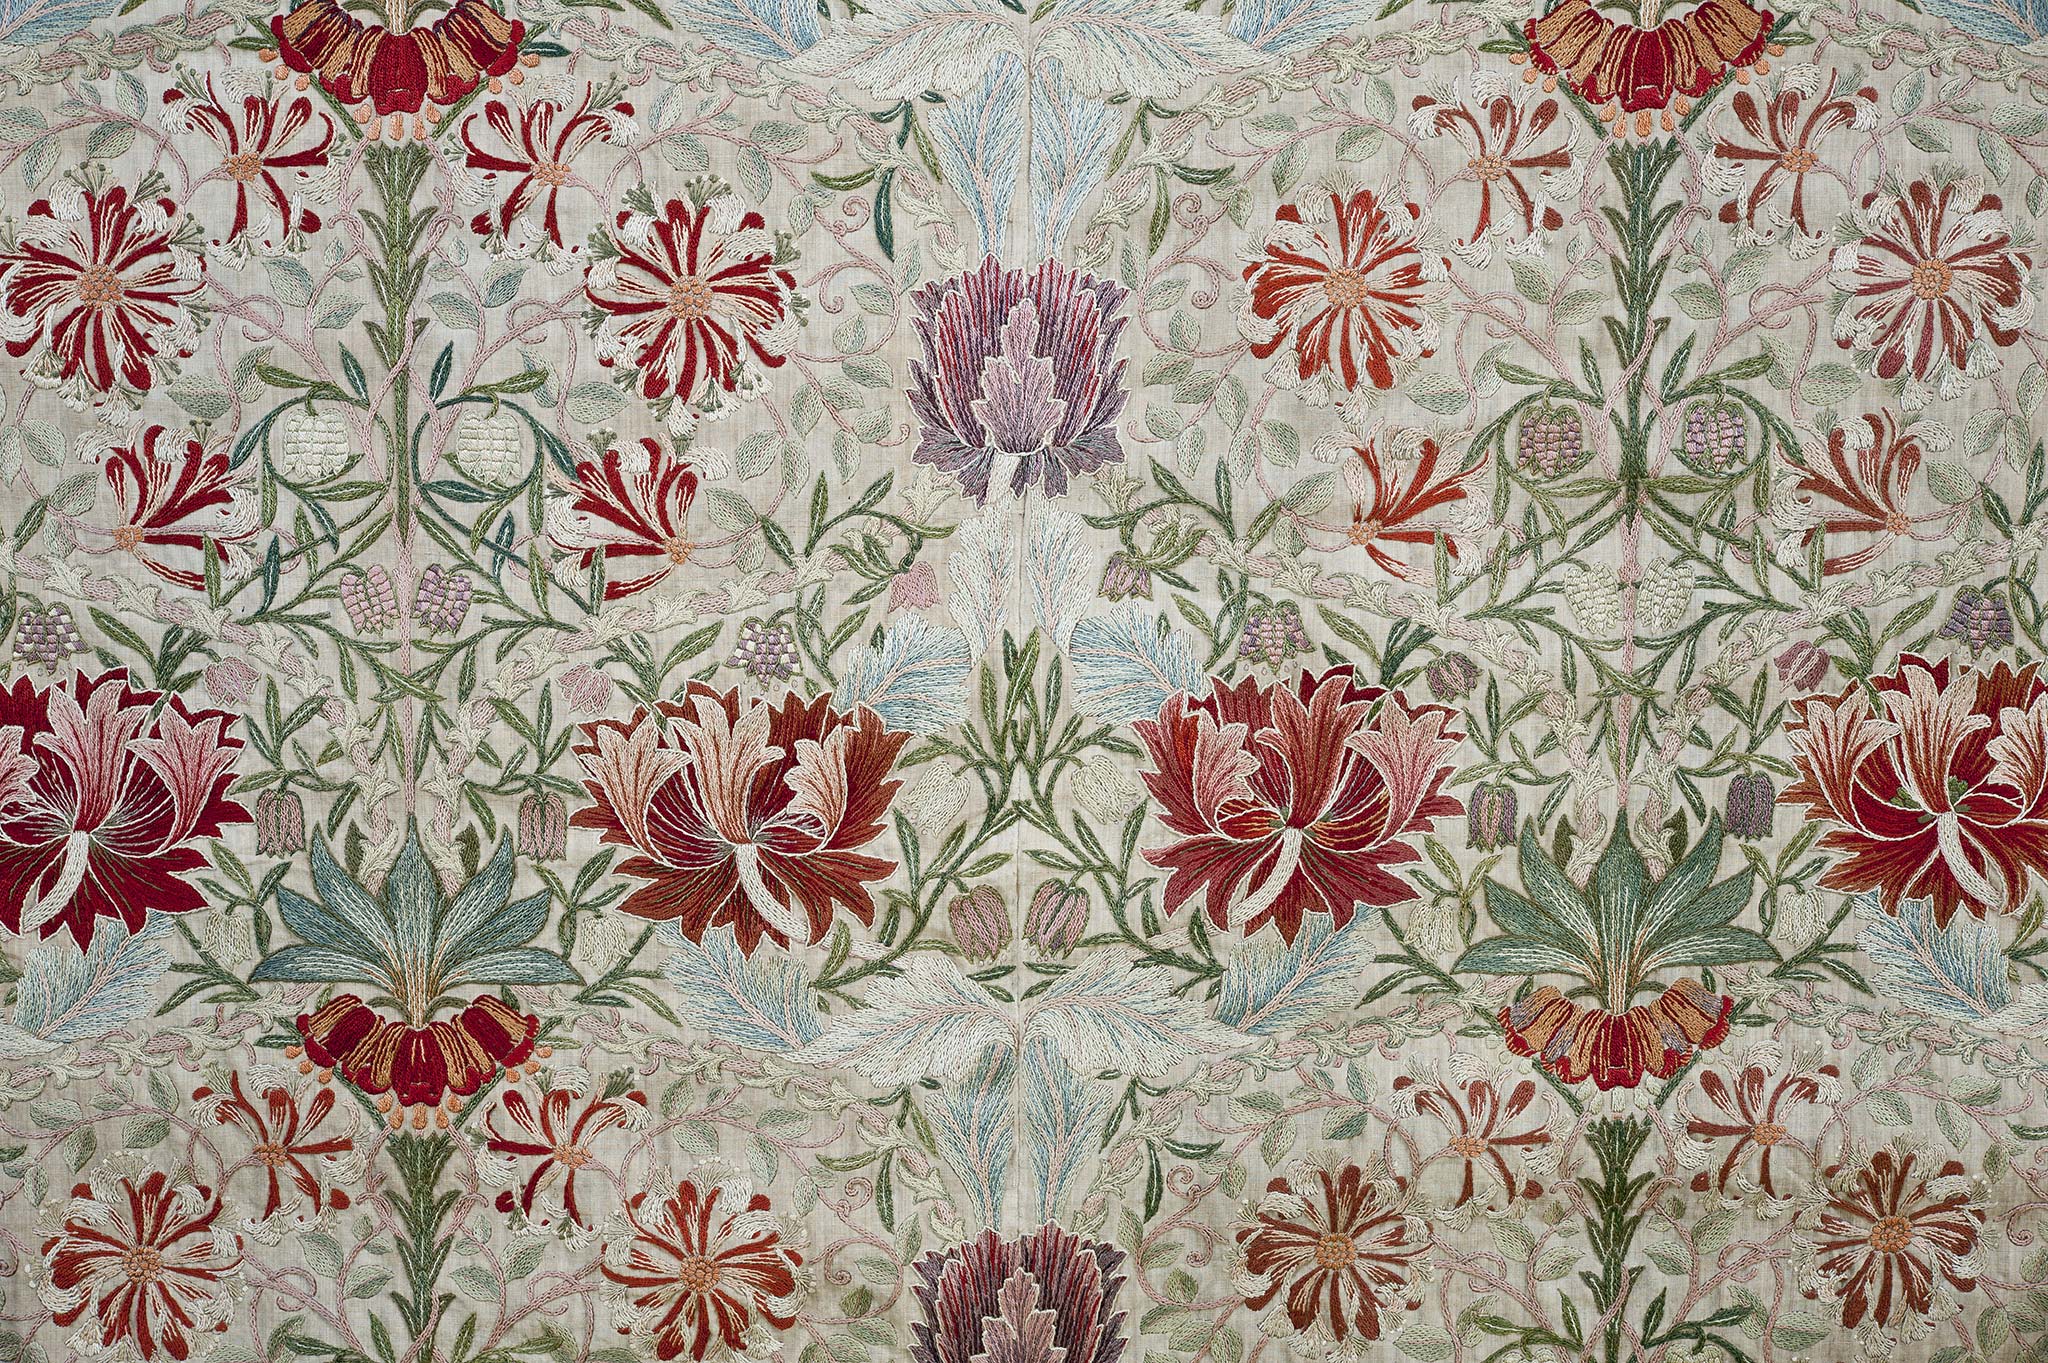 William Morris and Company: The Arts and Crafts Movement in Great